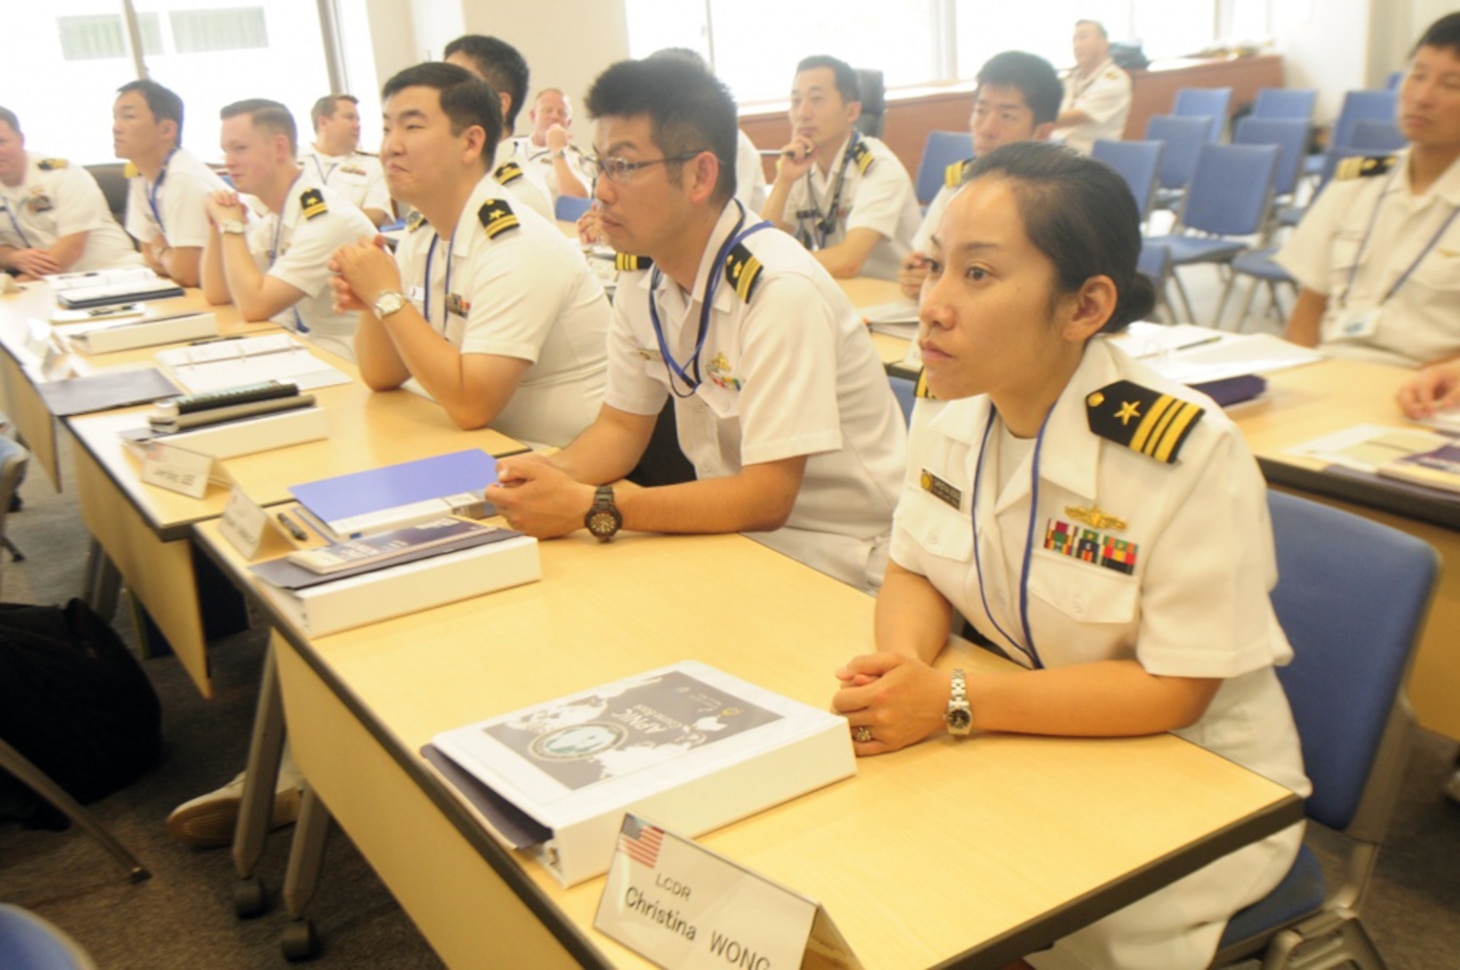 Lt. Cmdr. Christina Wong is one of the 25 staff level naval officers attending the first Asia-Pacific Navy Planning Process International Course (APNIC) at the Japan Maritime Self-Defense Force (JMSDF) Command and Staff College, June 20, 2016.  25 students from eight navies showed up for the first day of the two-week course to learn how to formulate a plan to conduct Humanitarian Assistance and Disaster Relief (HADR) operations. 